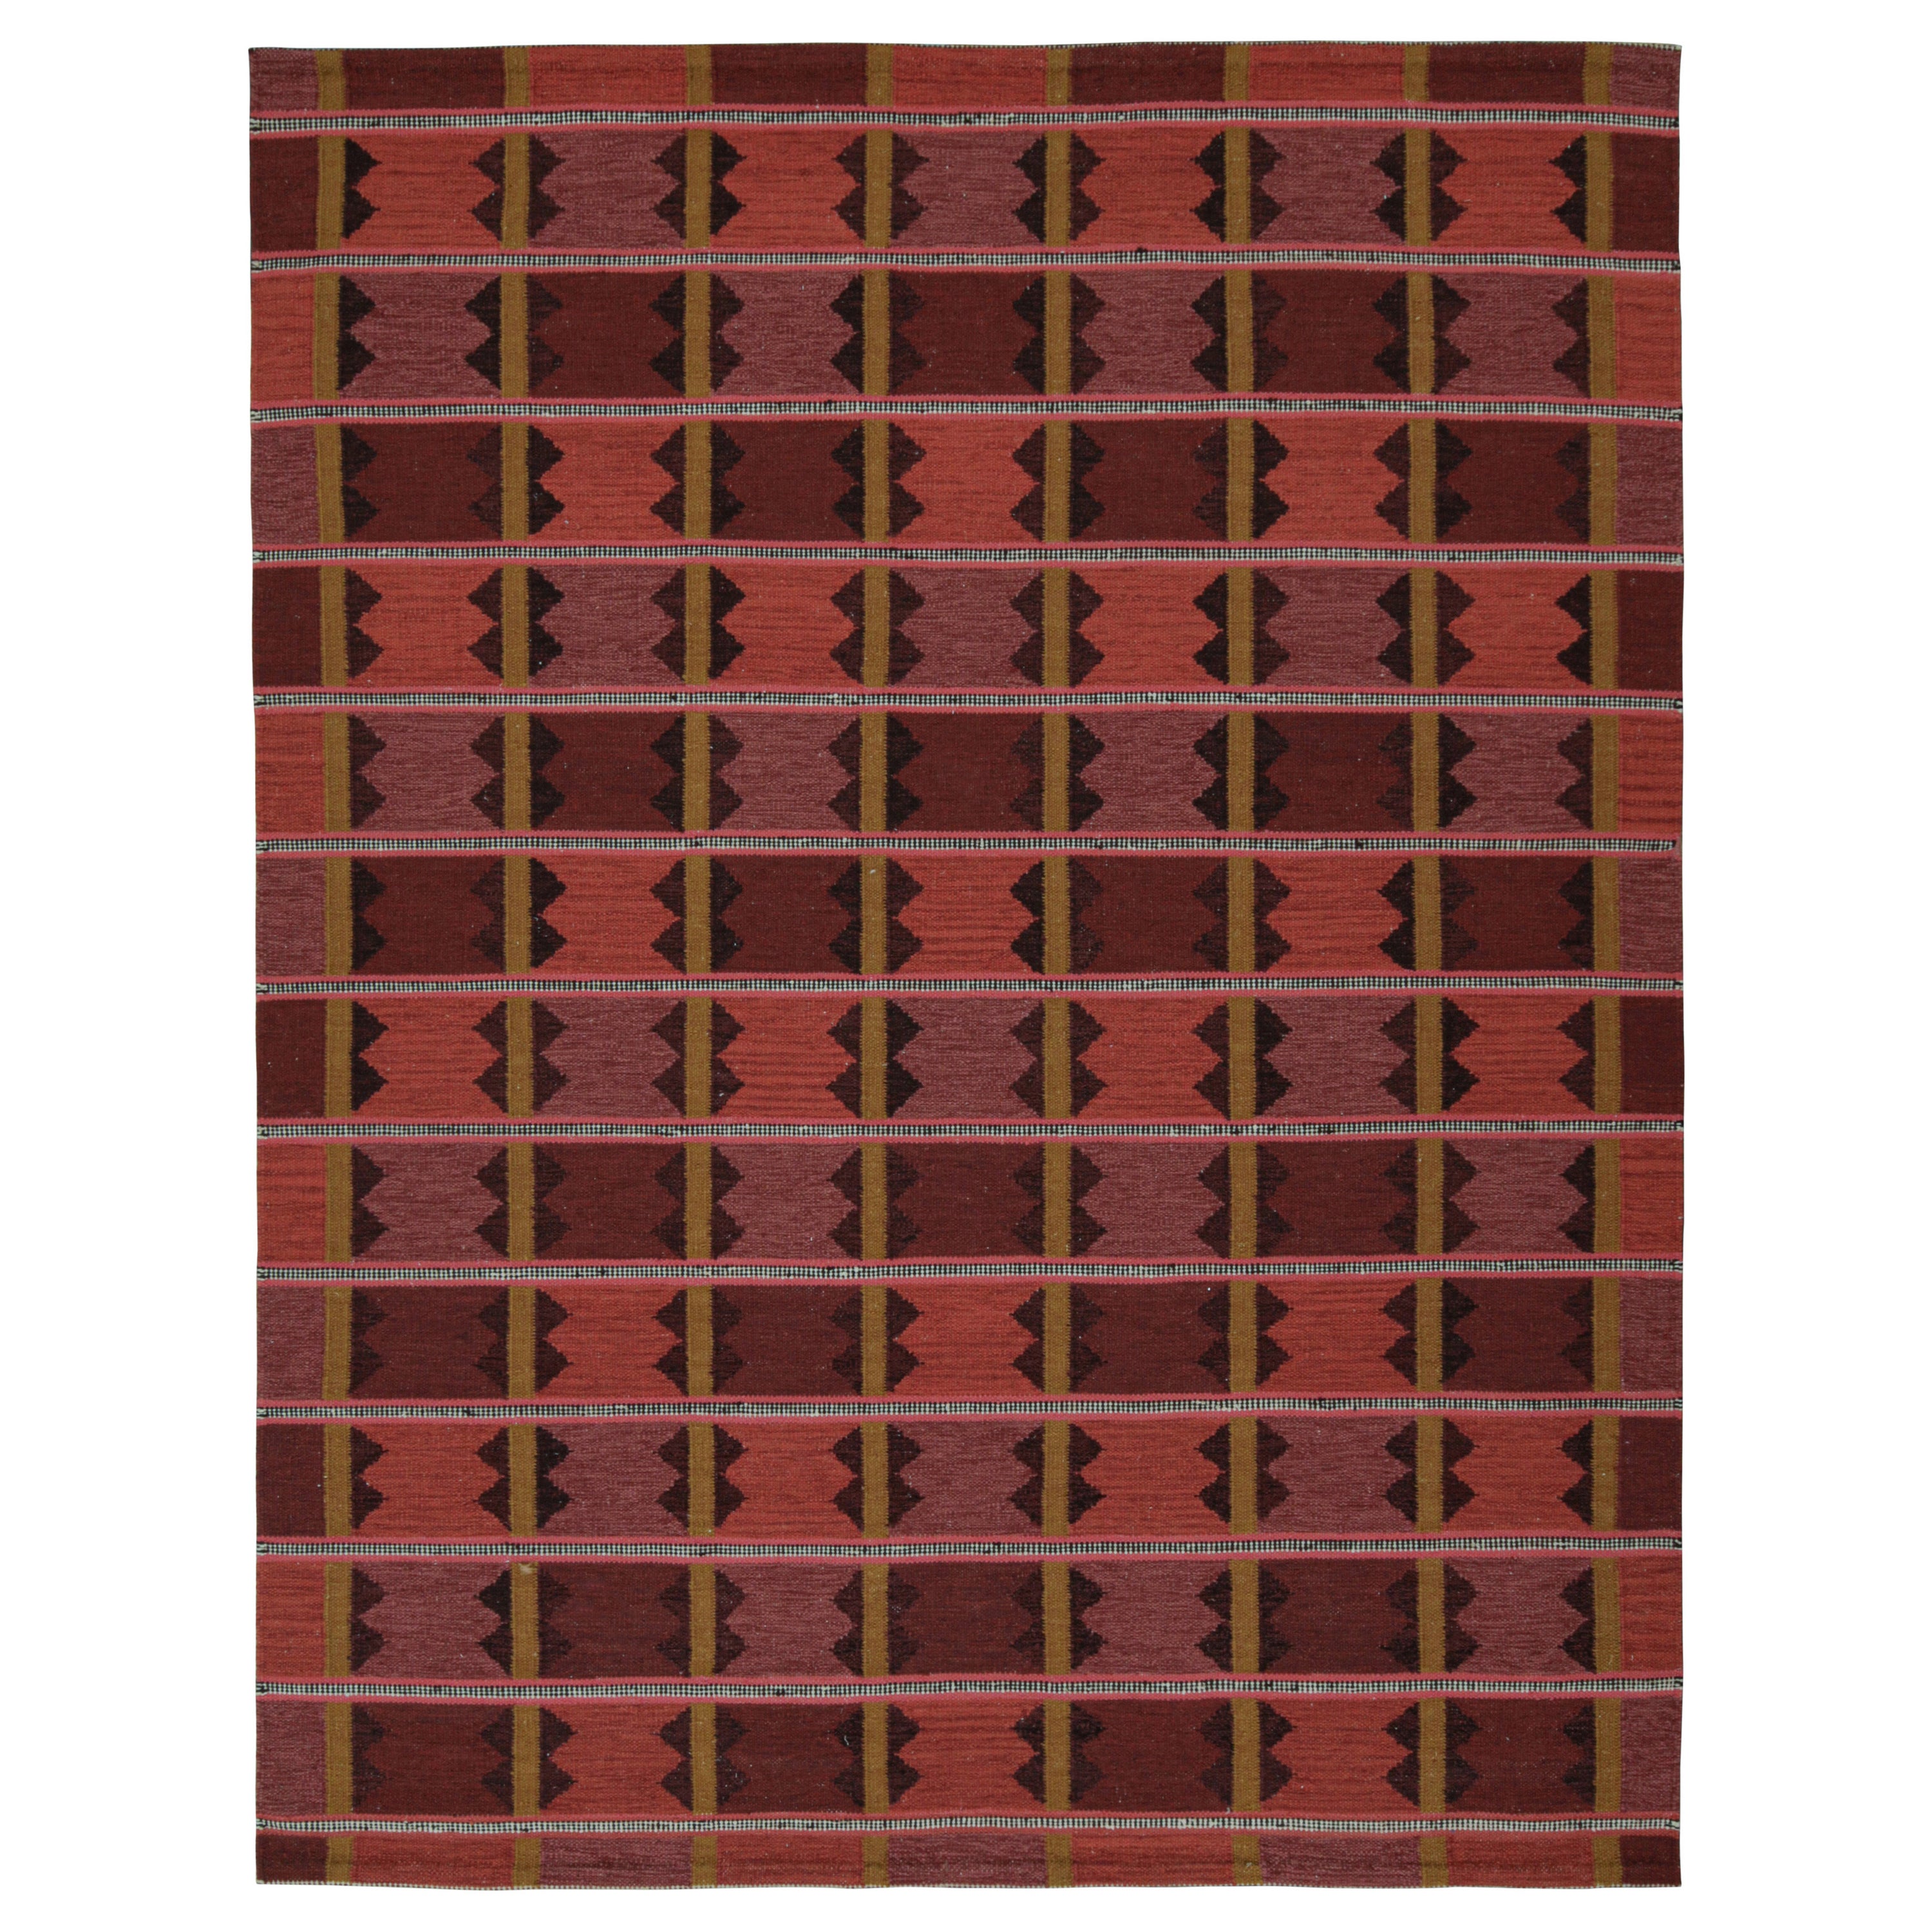 Rug & Kilim’s Scandinavian Style Kilim with Patterns in Tones of Red & Gold